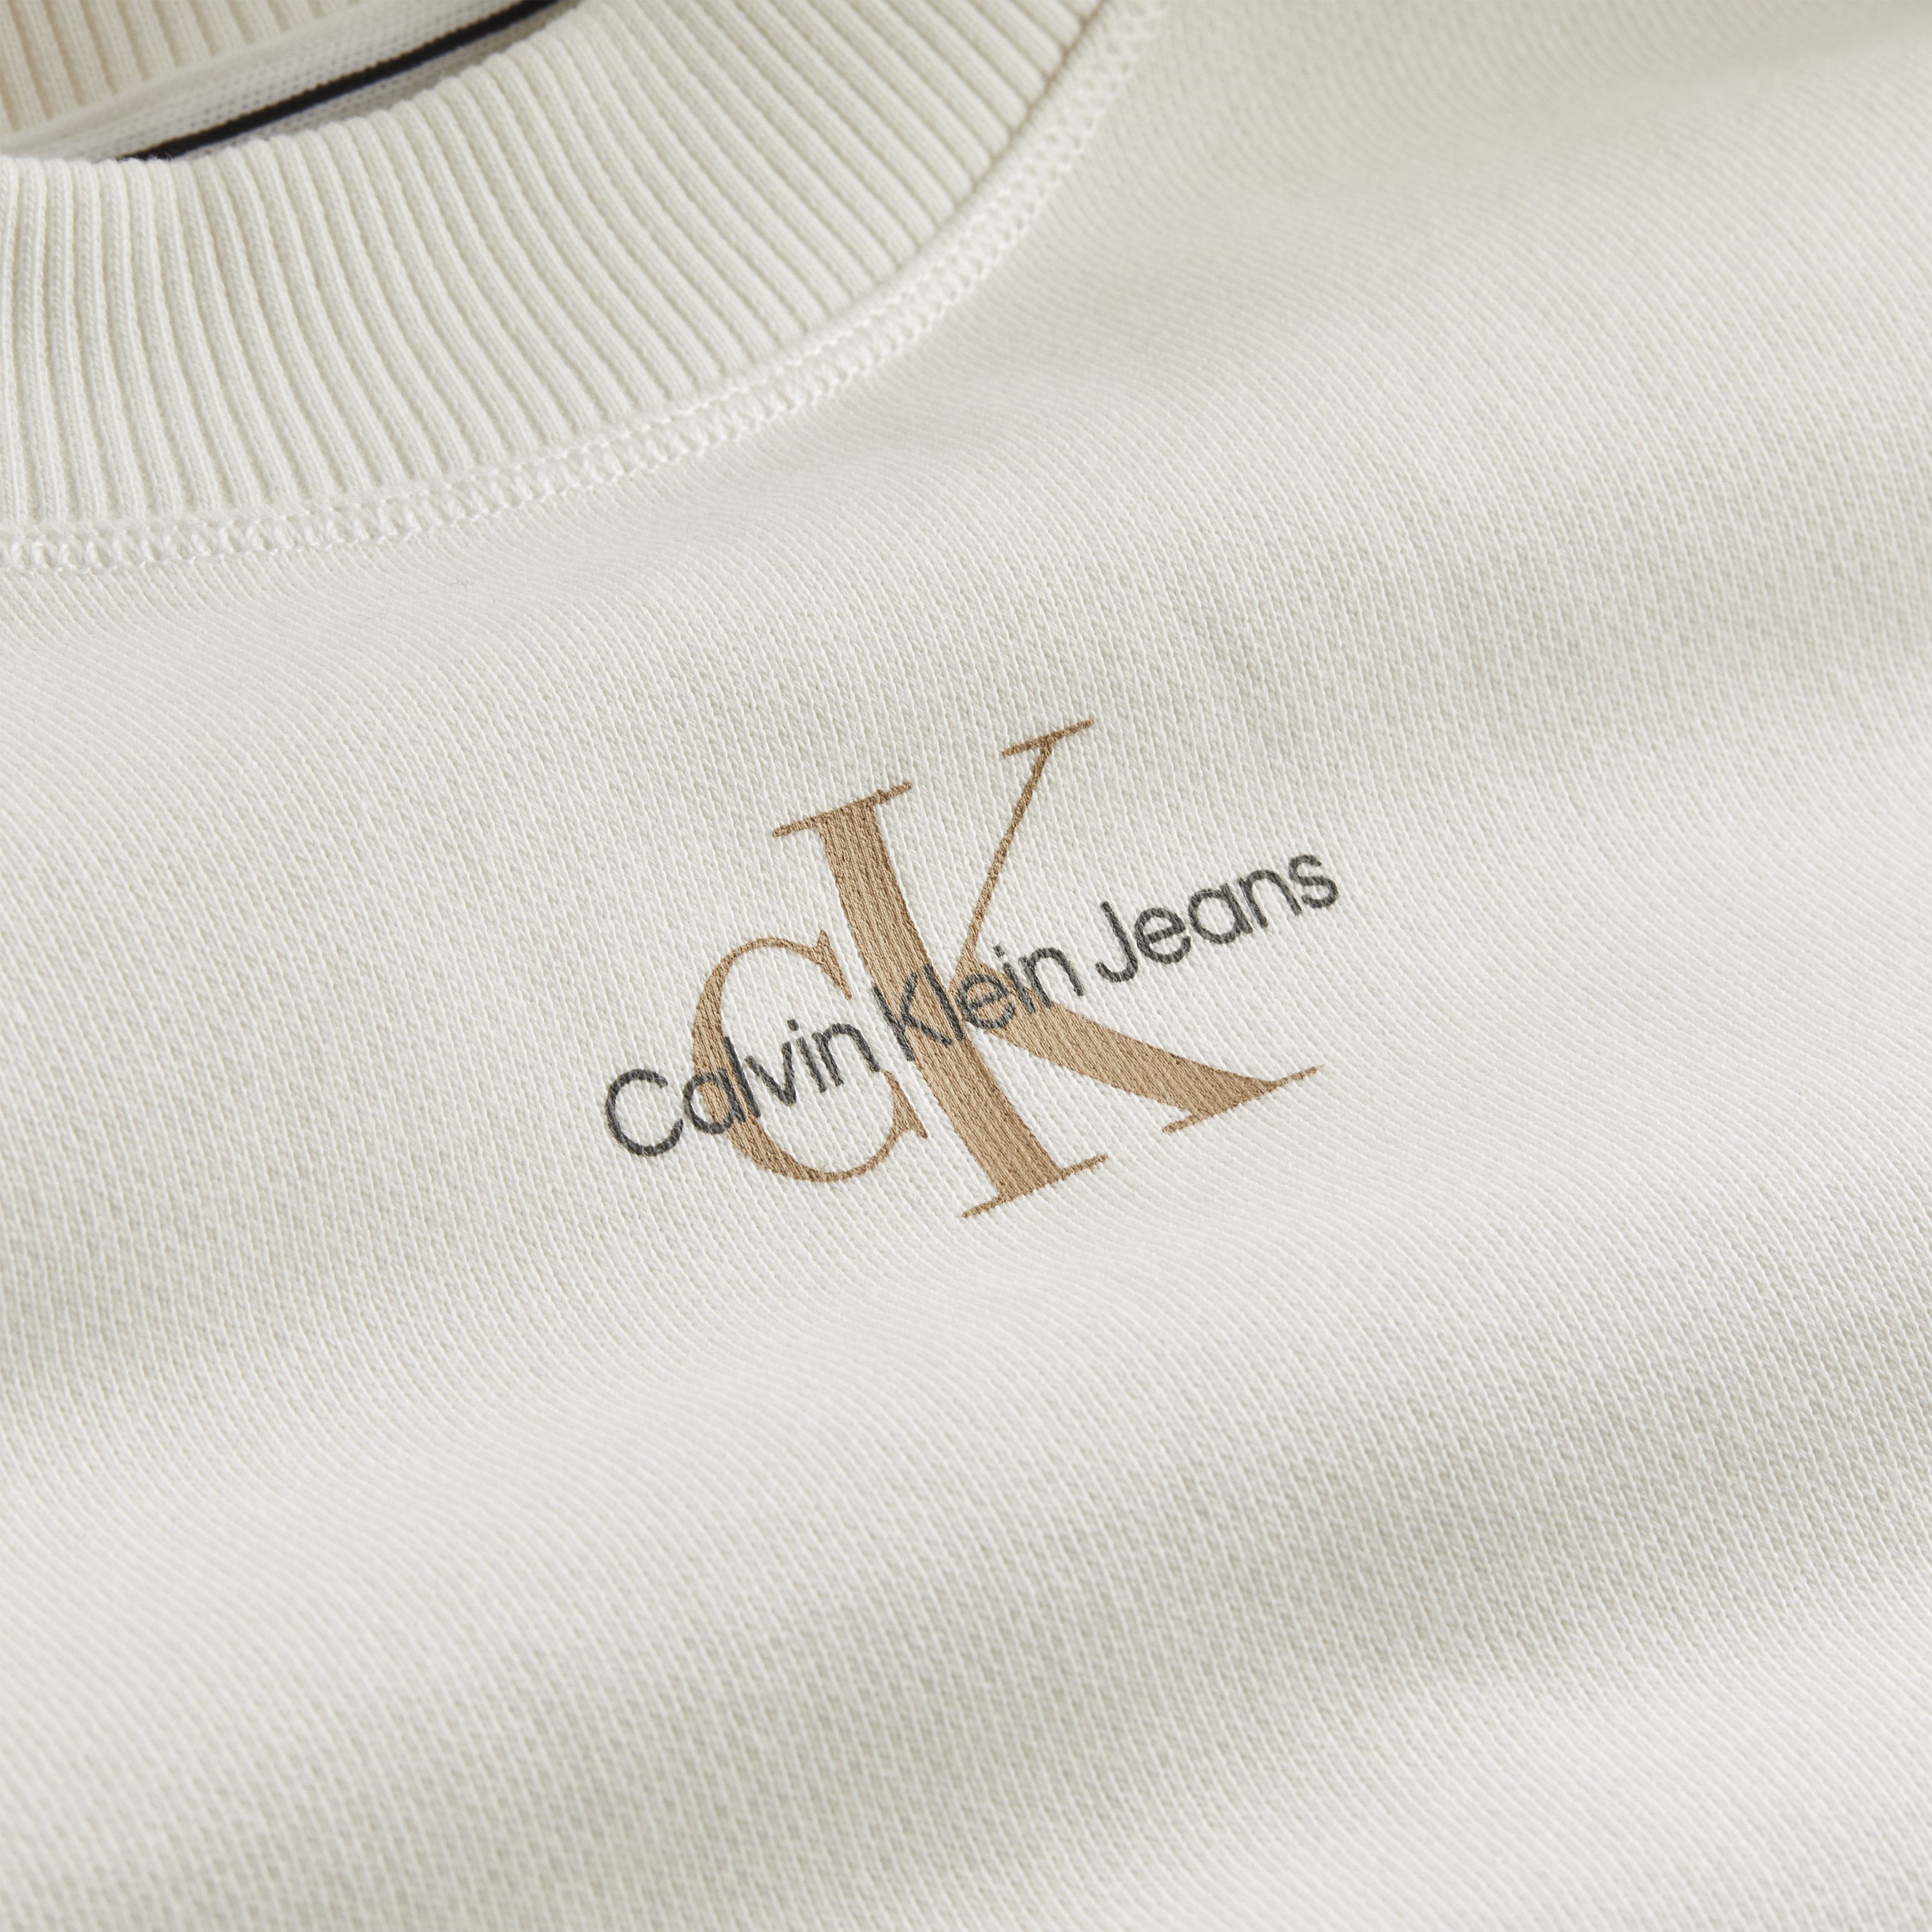 Calvin Klein Jeans - Cotton sweatshirt with logo, White Ivory, large image number 2